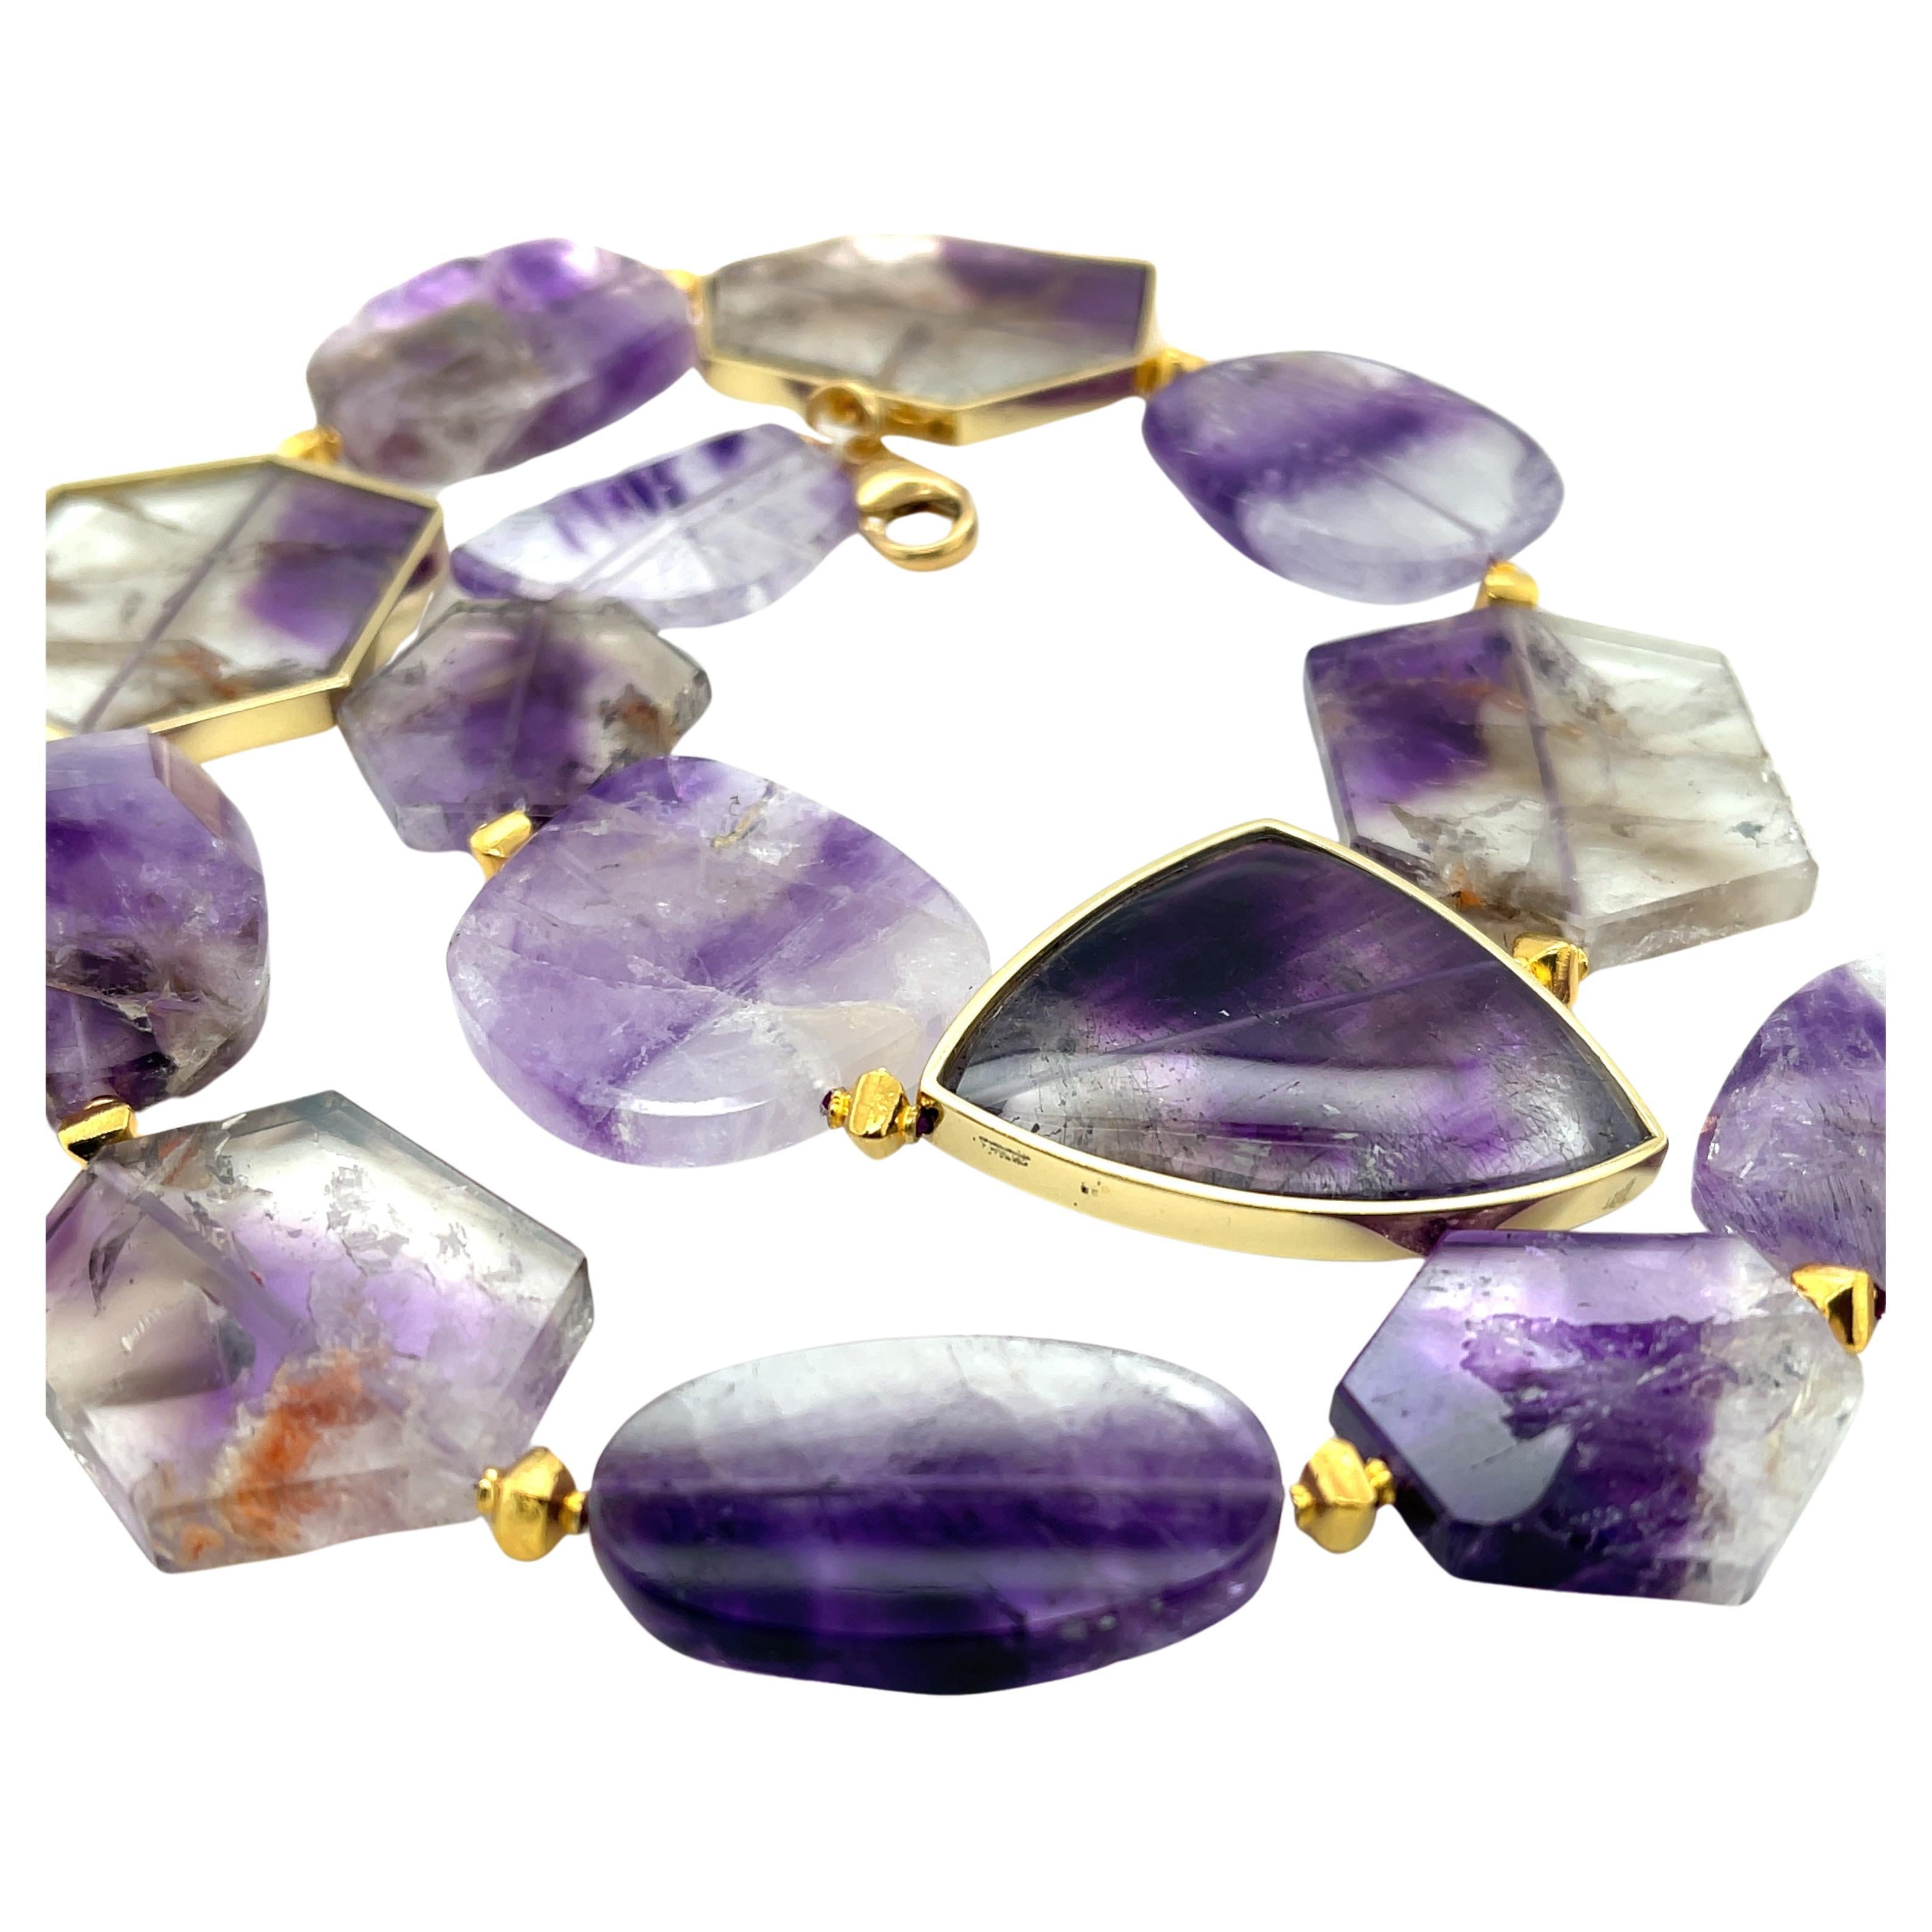 This one-of-a-kind amethyst necklace is a real statement piece that will have your friends saying, 